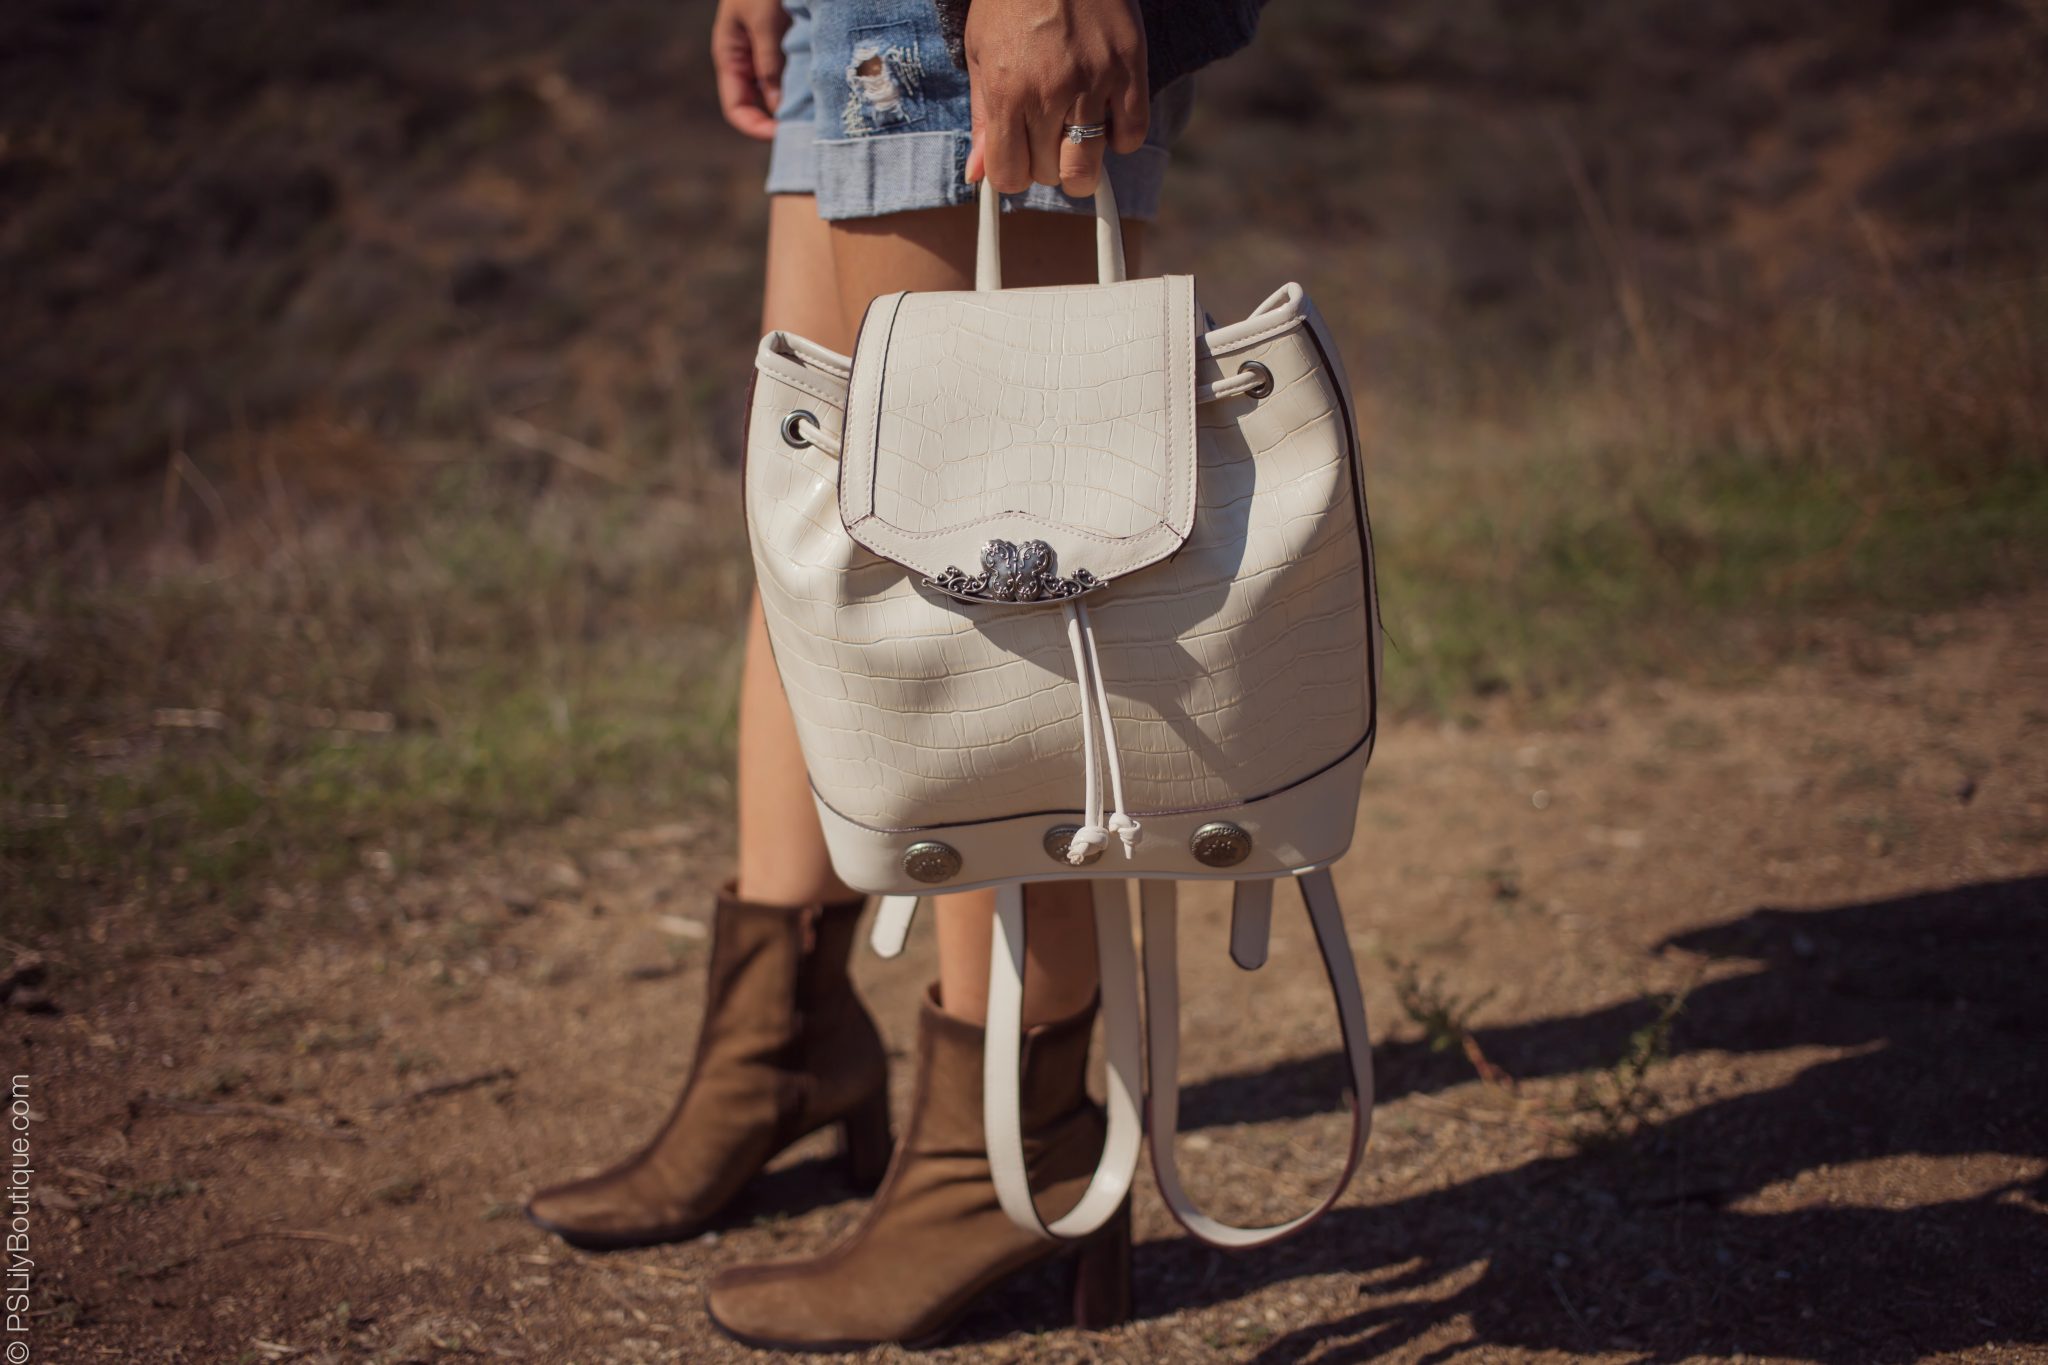 The Fall-pinterest-pslilyboutique-francosarto-brown-boots-white-bueno-target-small-backpack-fashion-blog